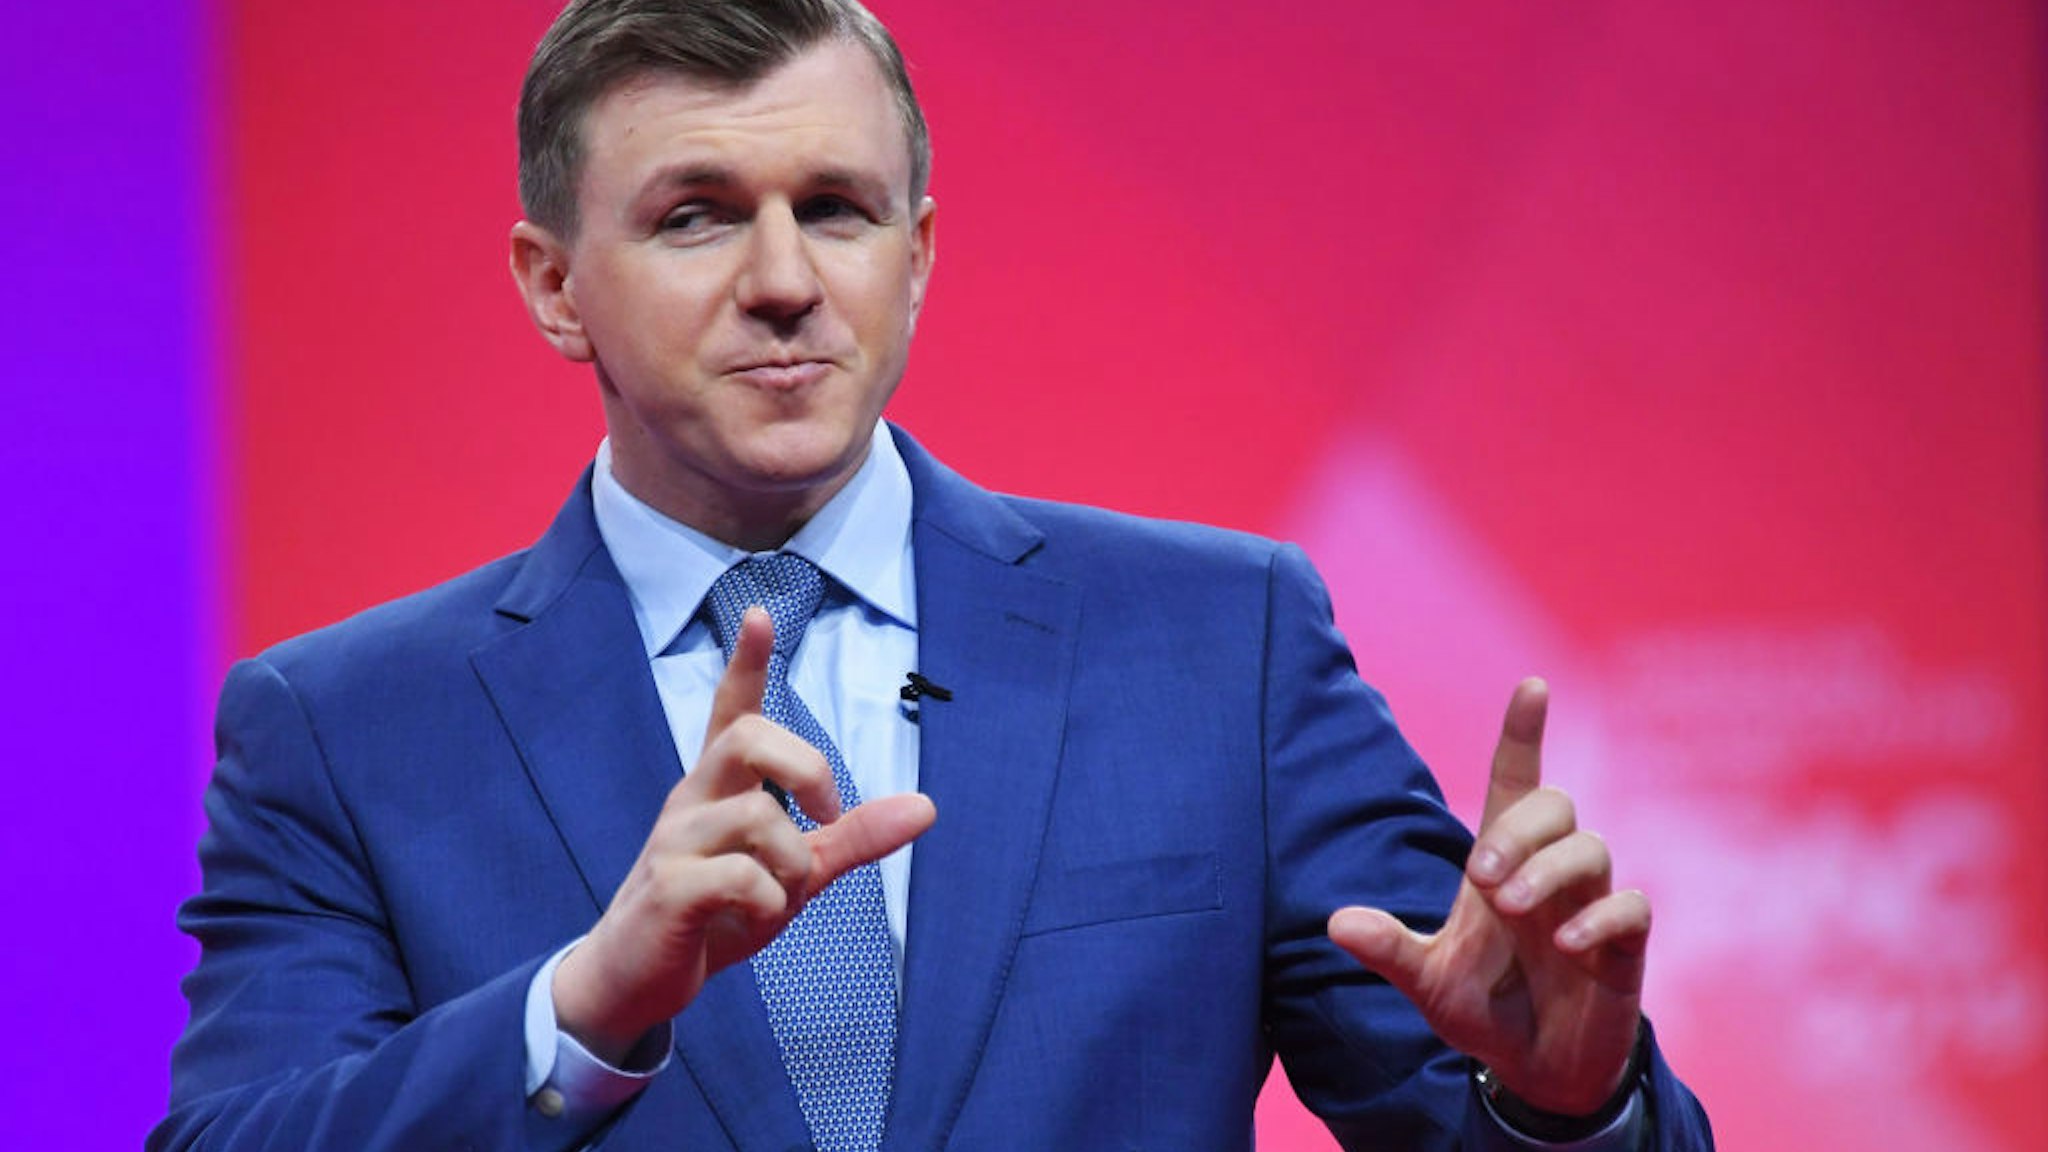 Conservative political activist James O'Keefe speaks during the annual Conservative Political Action Conference (CPAC) in National Harbor, Maryland, on March 1, 2019.